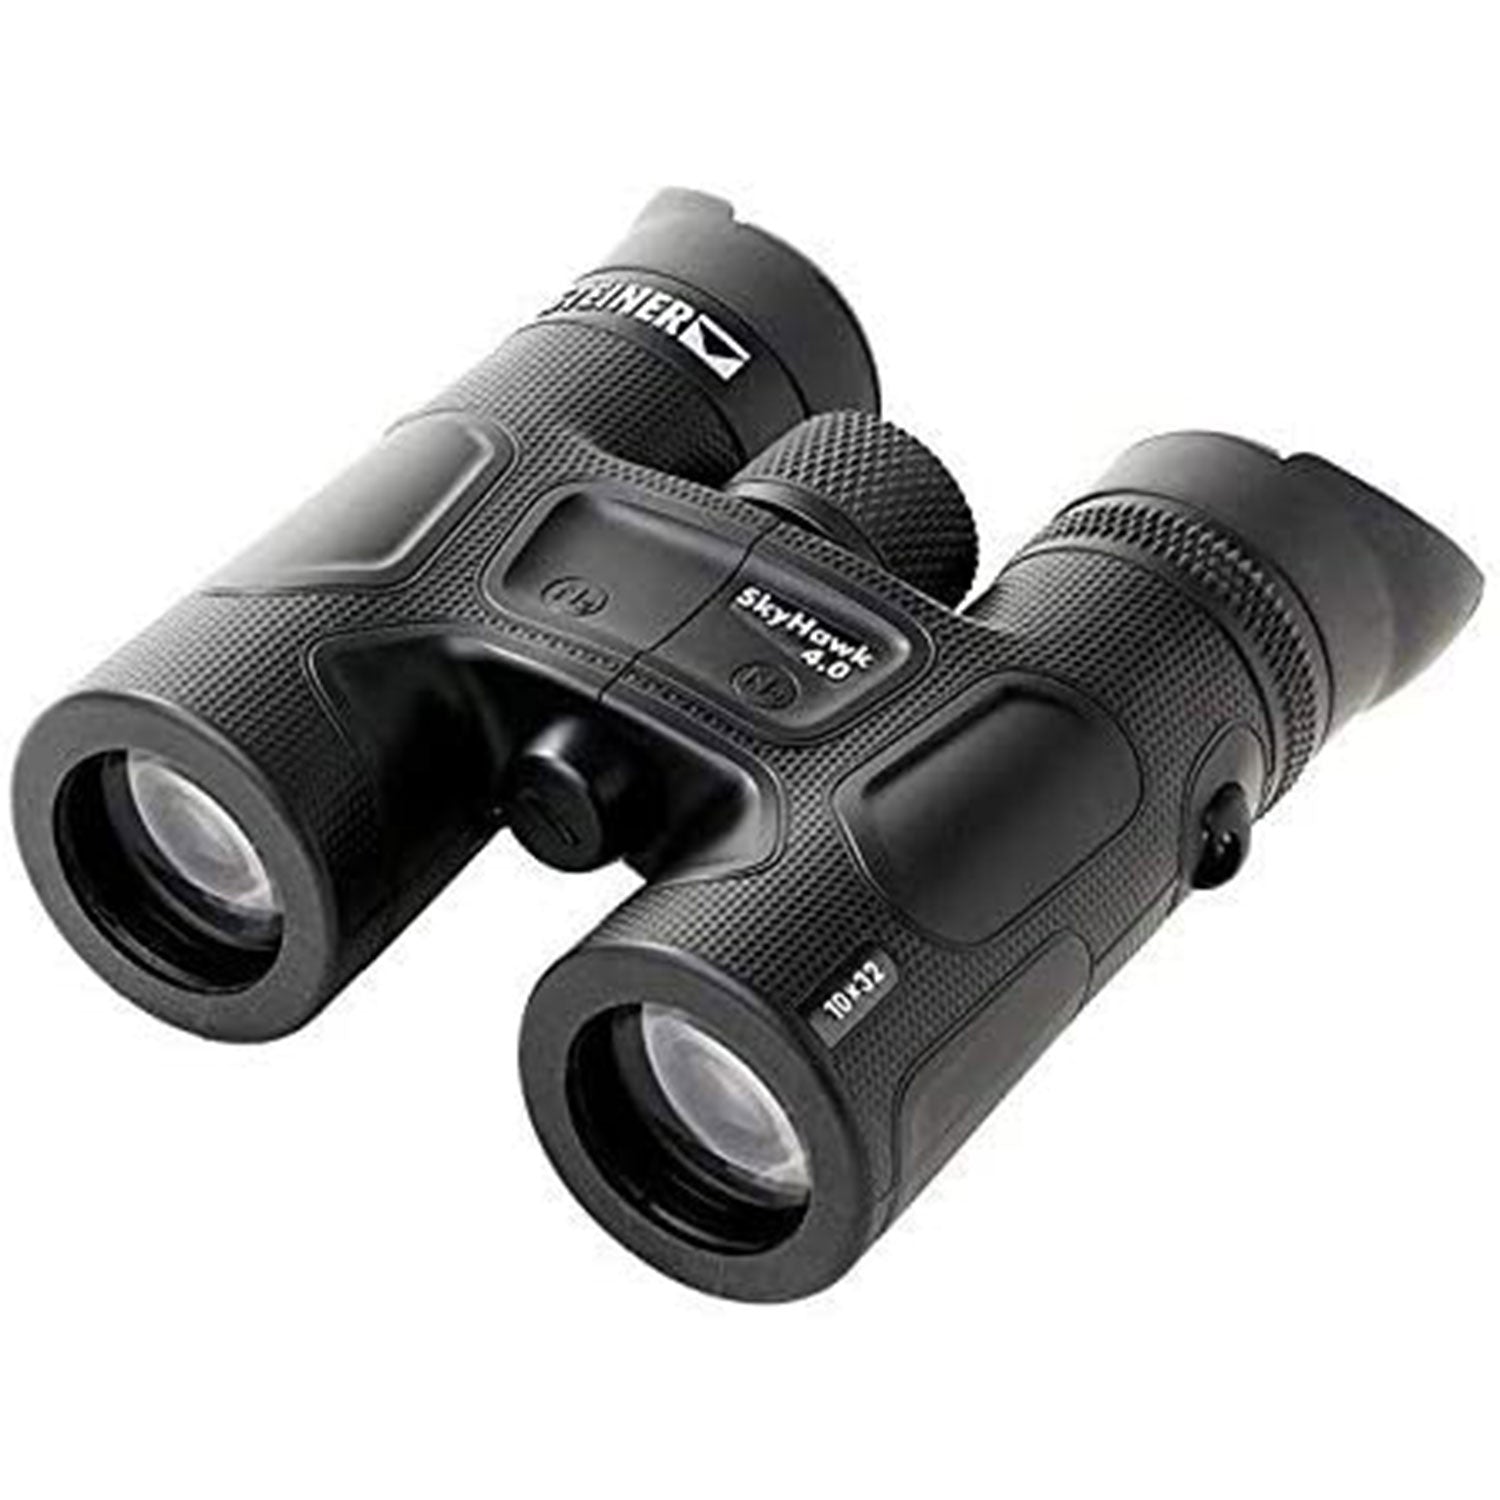 Steiner SkyHawk 4.0 10x32 Binoculars (23370900) Bundle with Padded Backpack, Floating Wrist Strap, and 6Ave Cleaning Kit